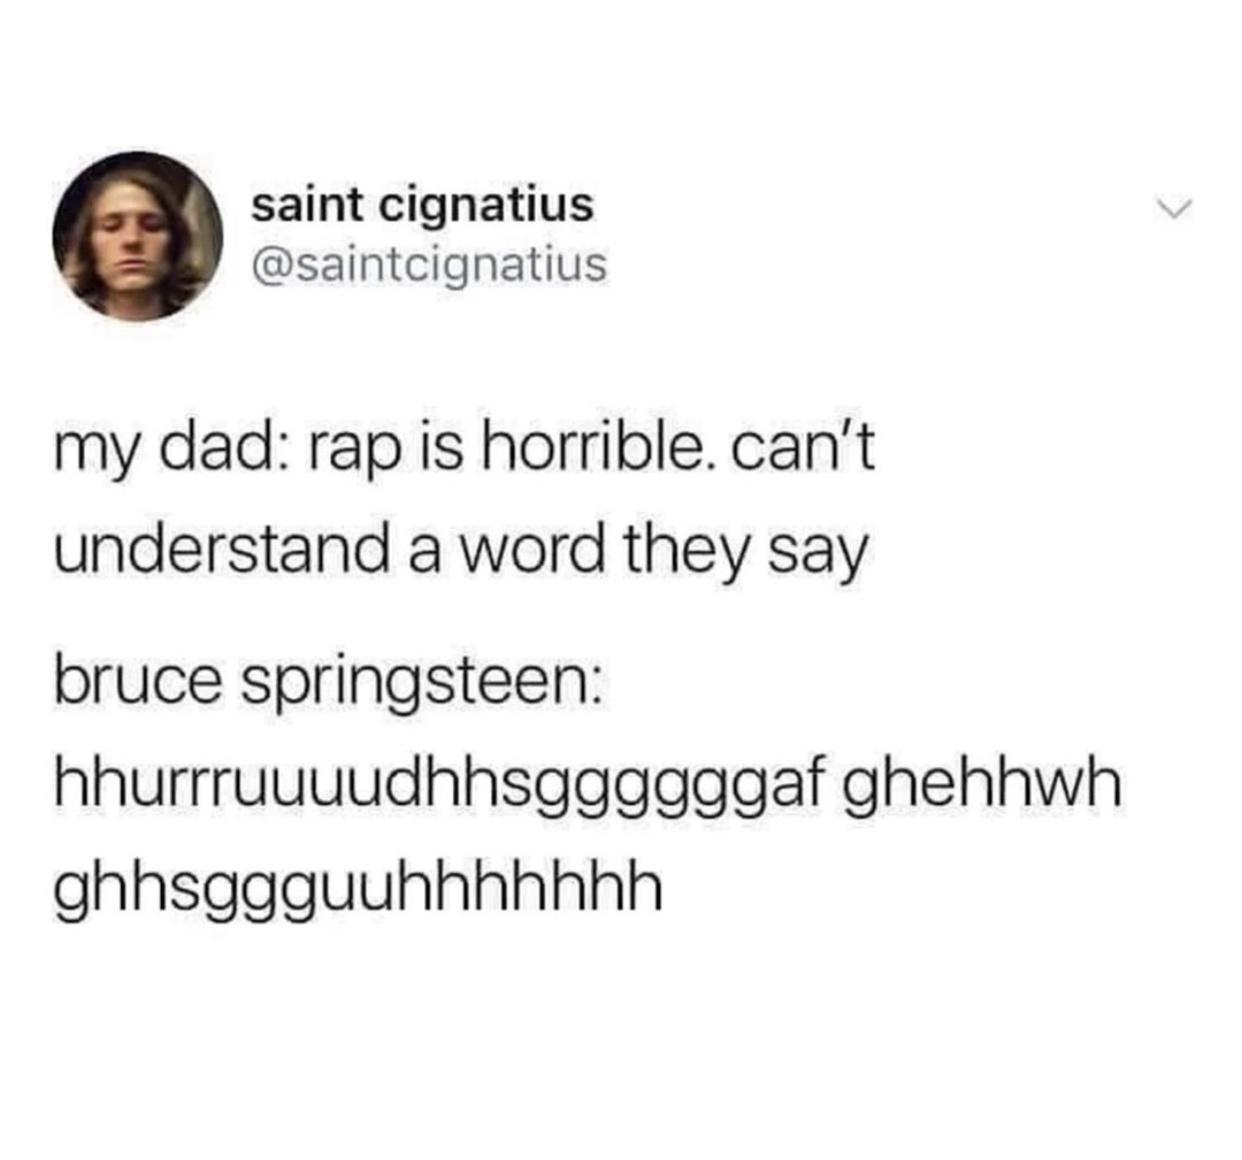 hilarious memes - best memes - thank you for coming to my ted talk meme - saint cignatius my dad rap is horrible. can't understand a word they say bruce springsteen hhurrruuuudhhsggggggaf ghehhwh ghhsggguuhhhhhhh